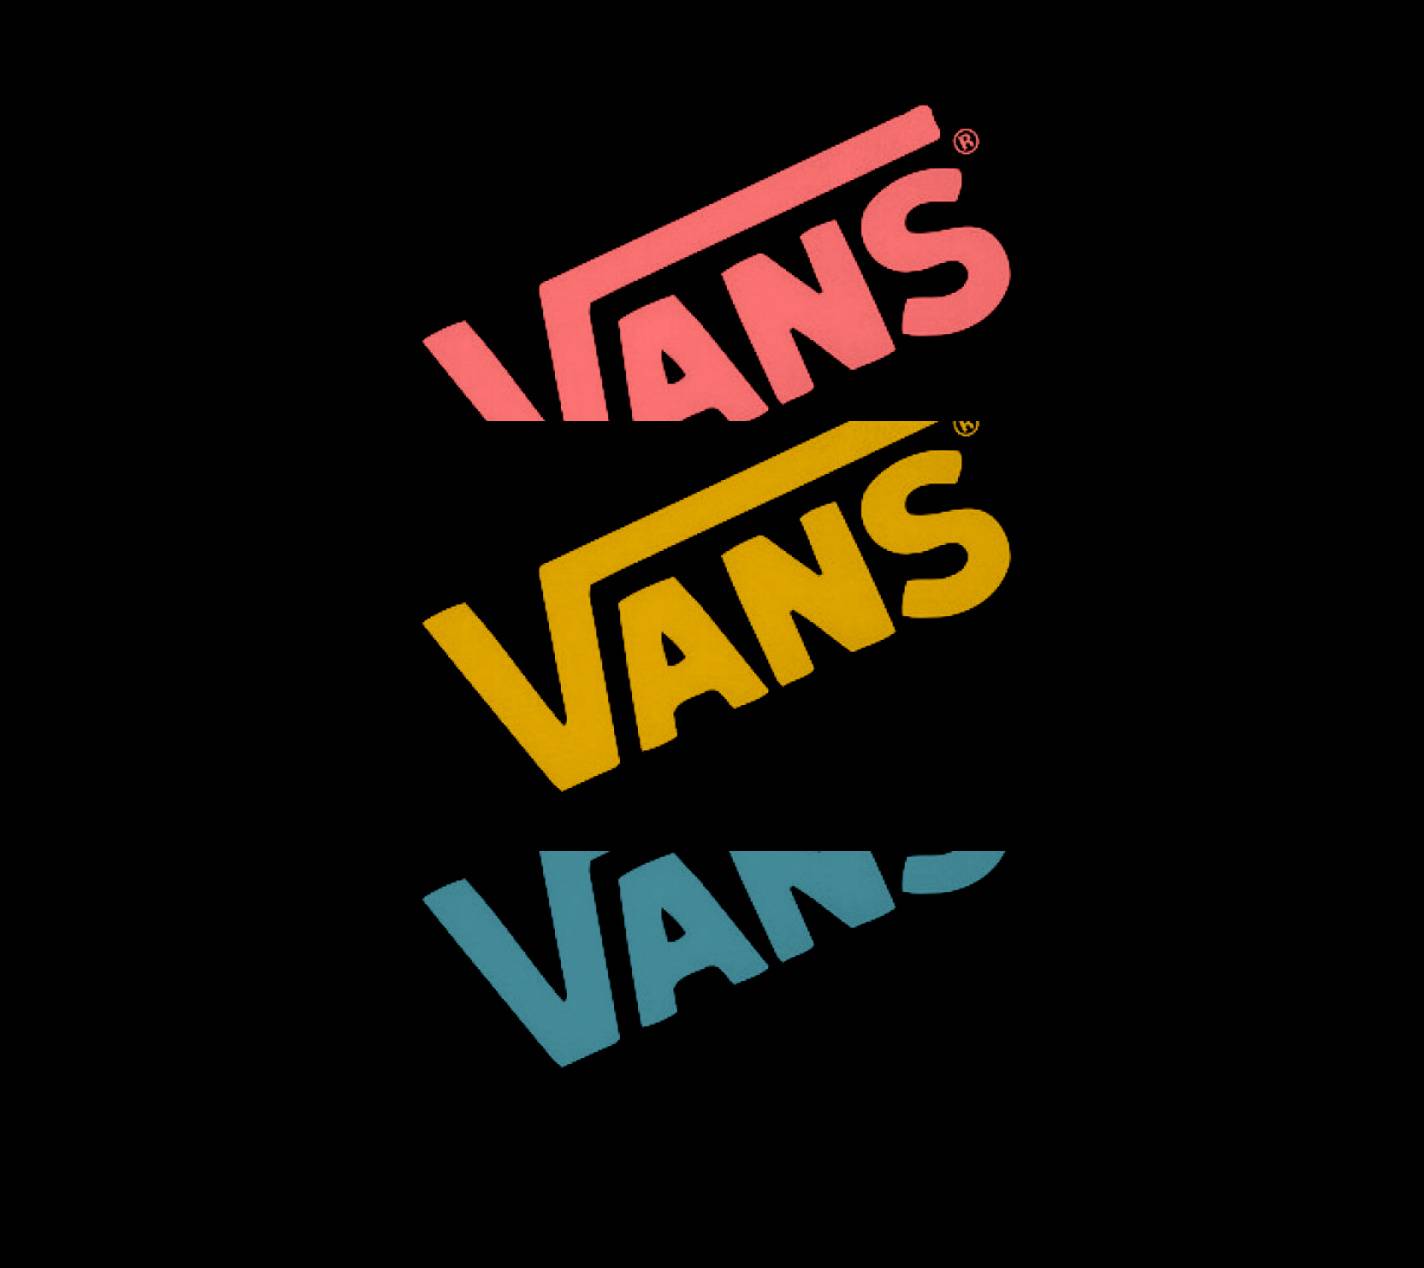 Vans Off the Wall Wallpaper Free Vans Off the Wall Background